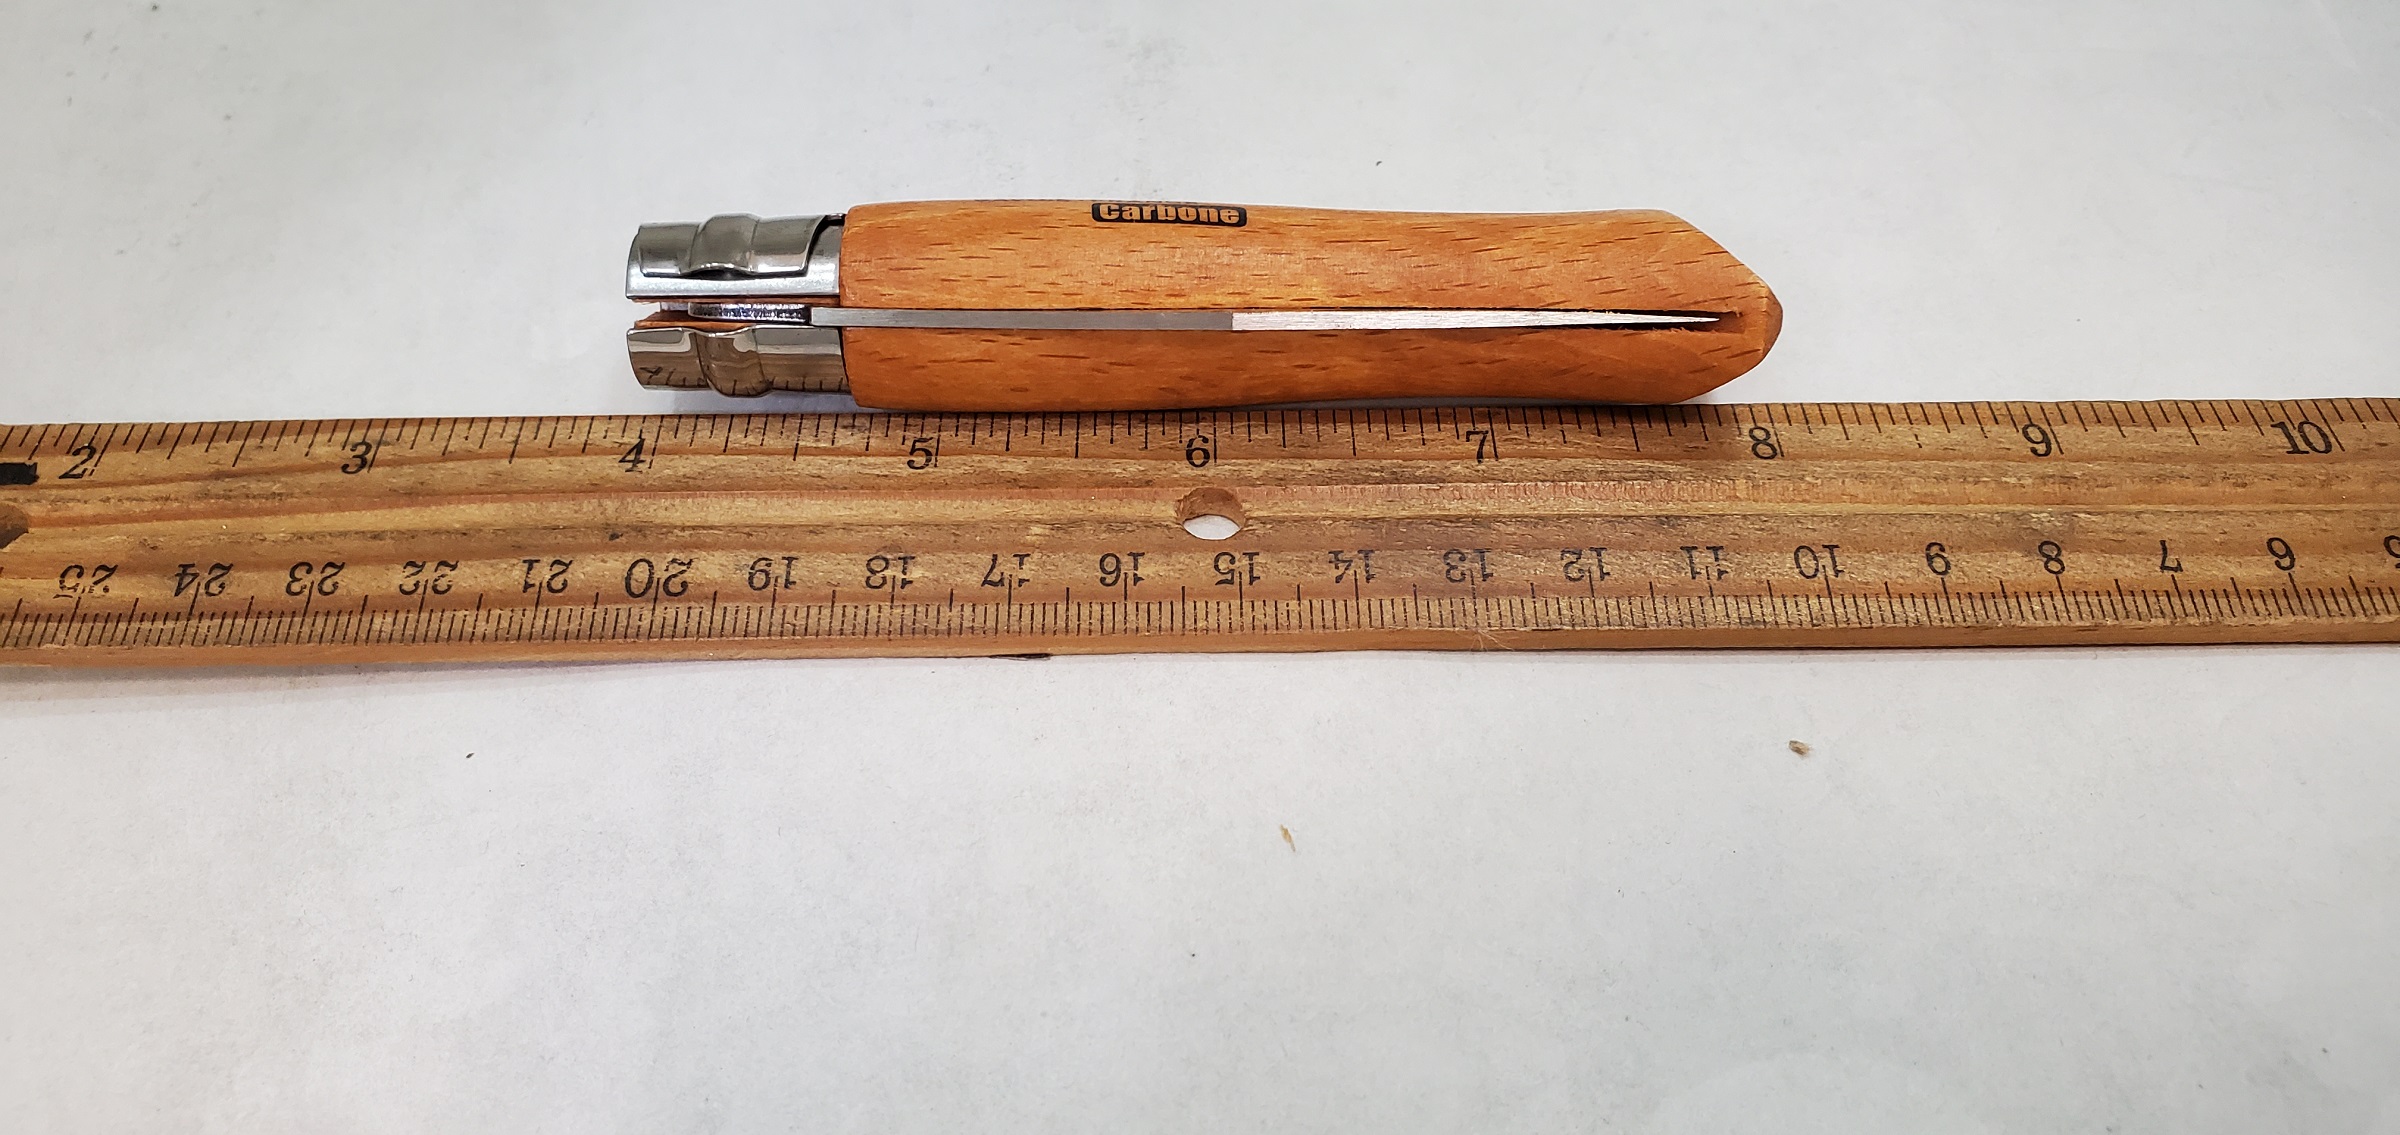 No. 7 Opinel Carbon Knife OP-13070 measures 4 inches when closed.